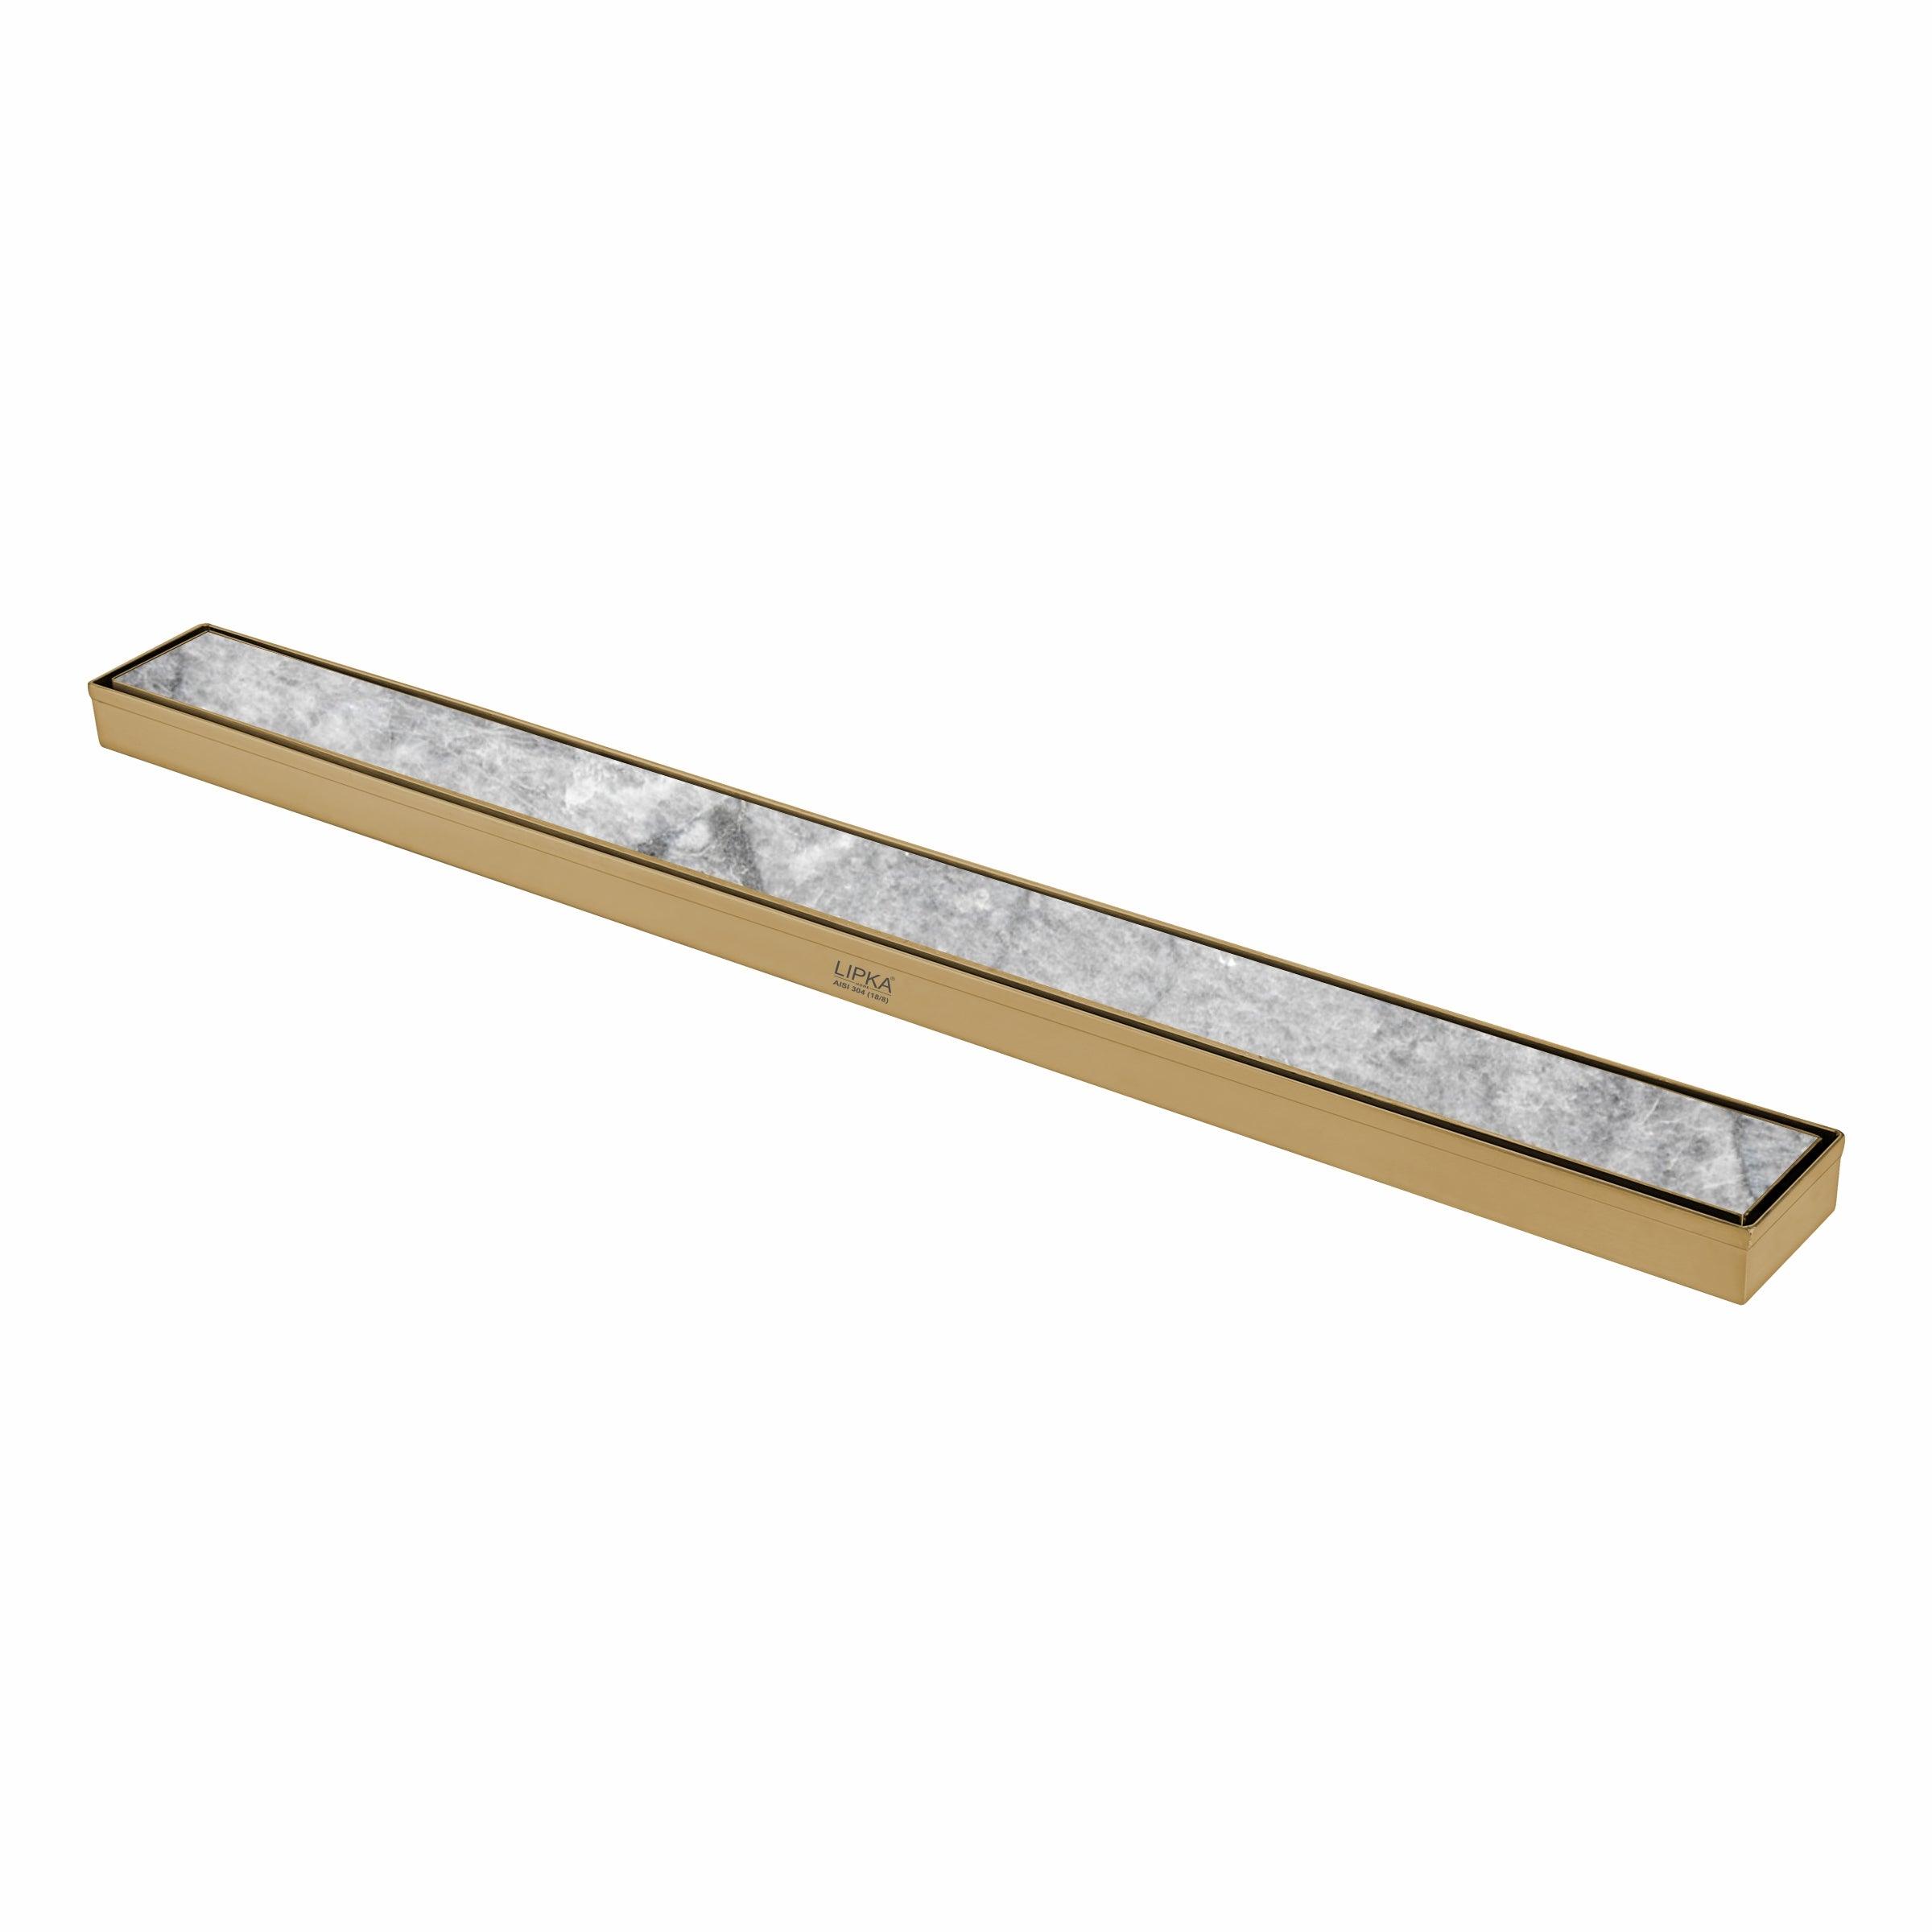 Marble Insert Shower Drain Channel - Yellow Gold (36 x 2 Inches)